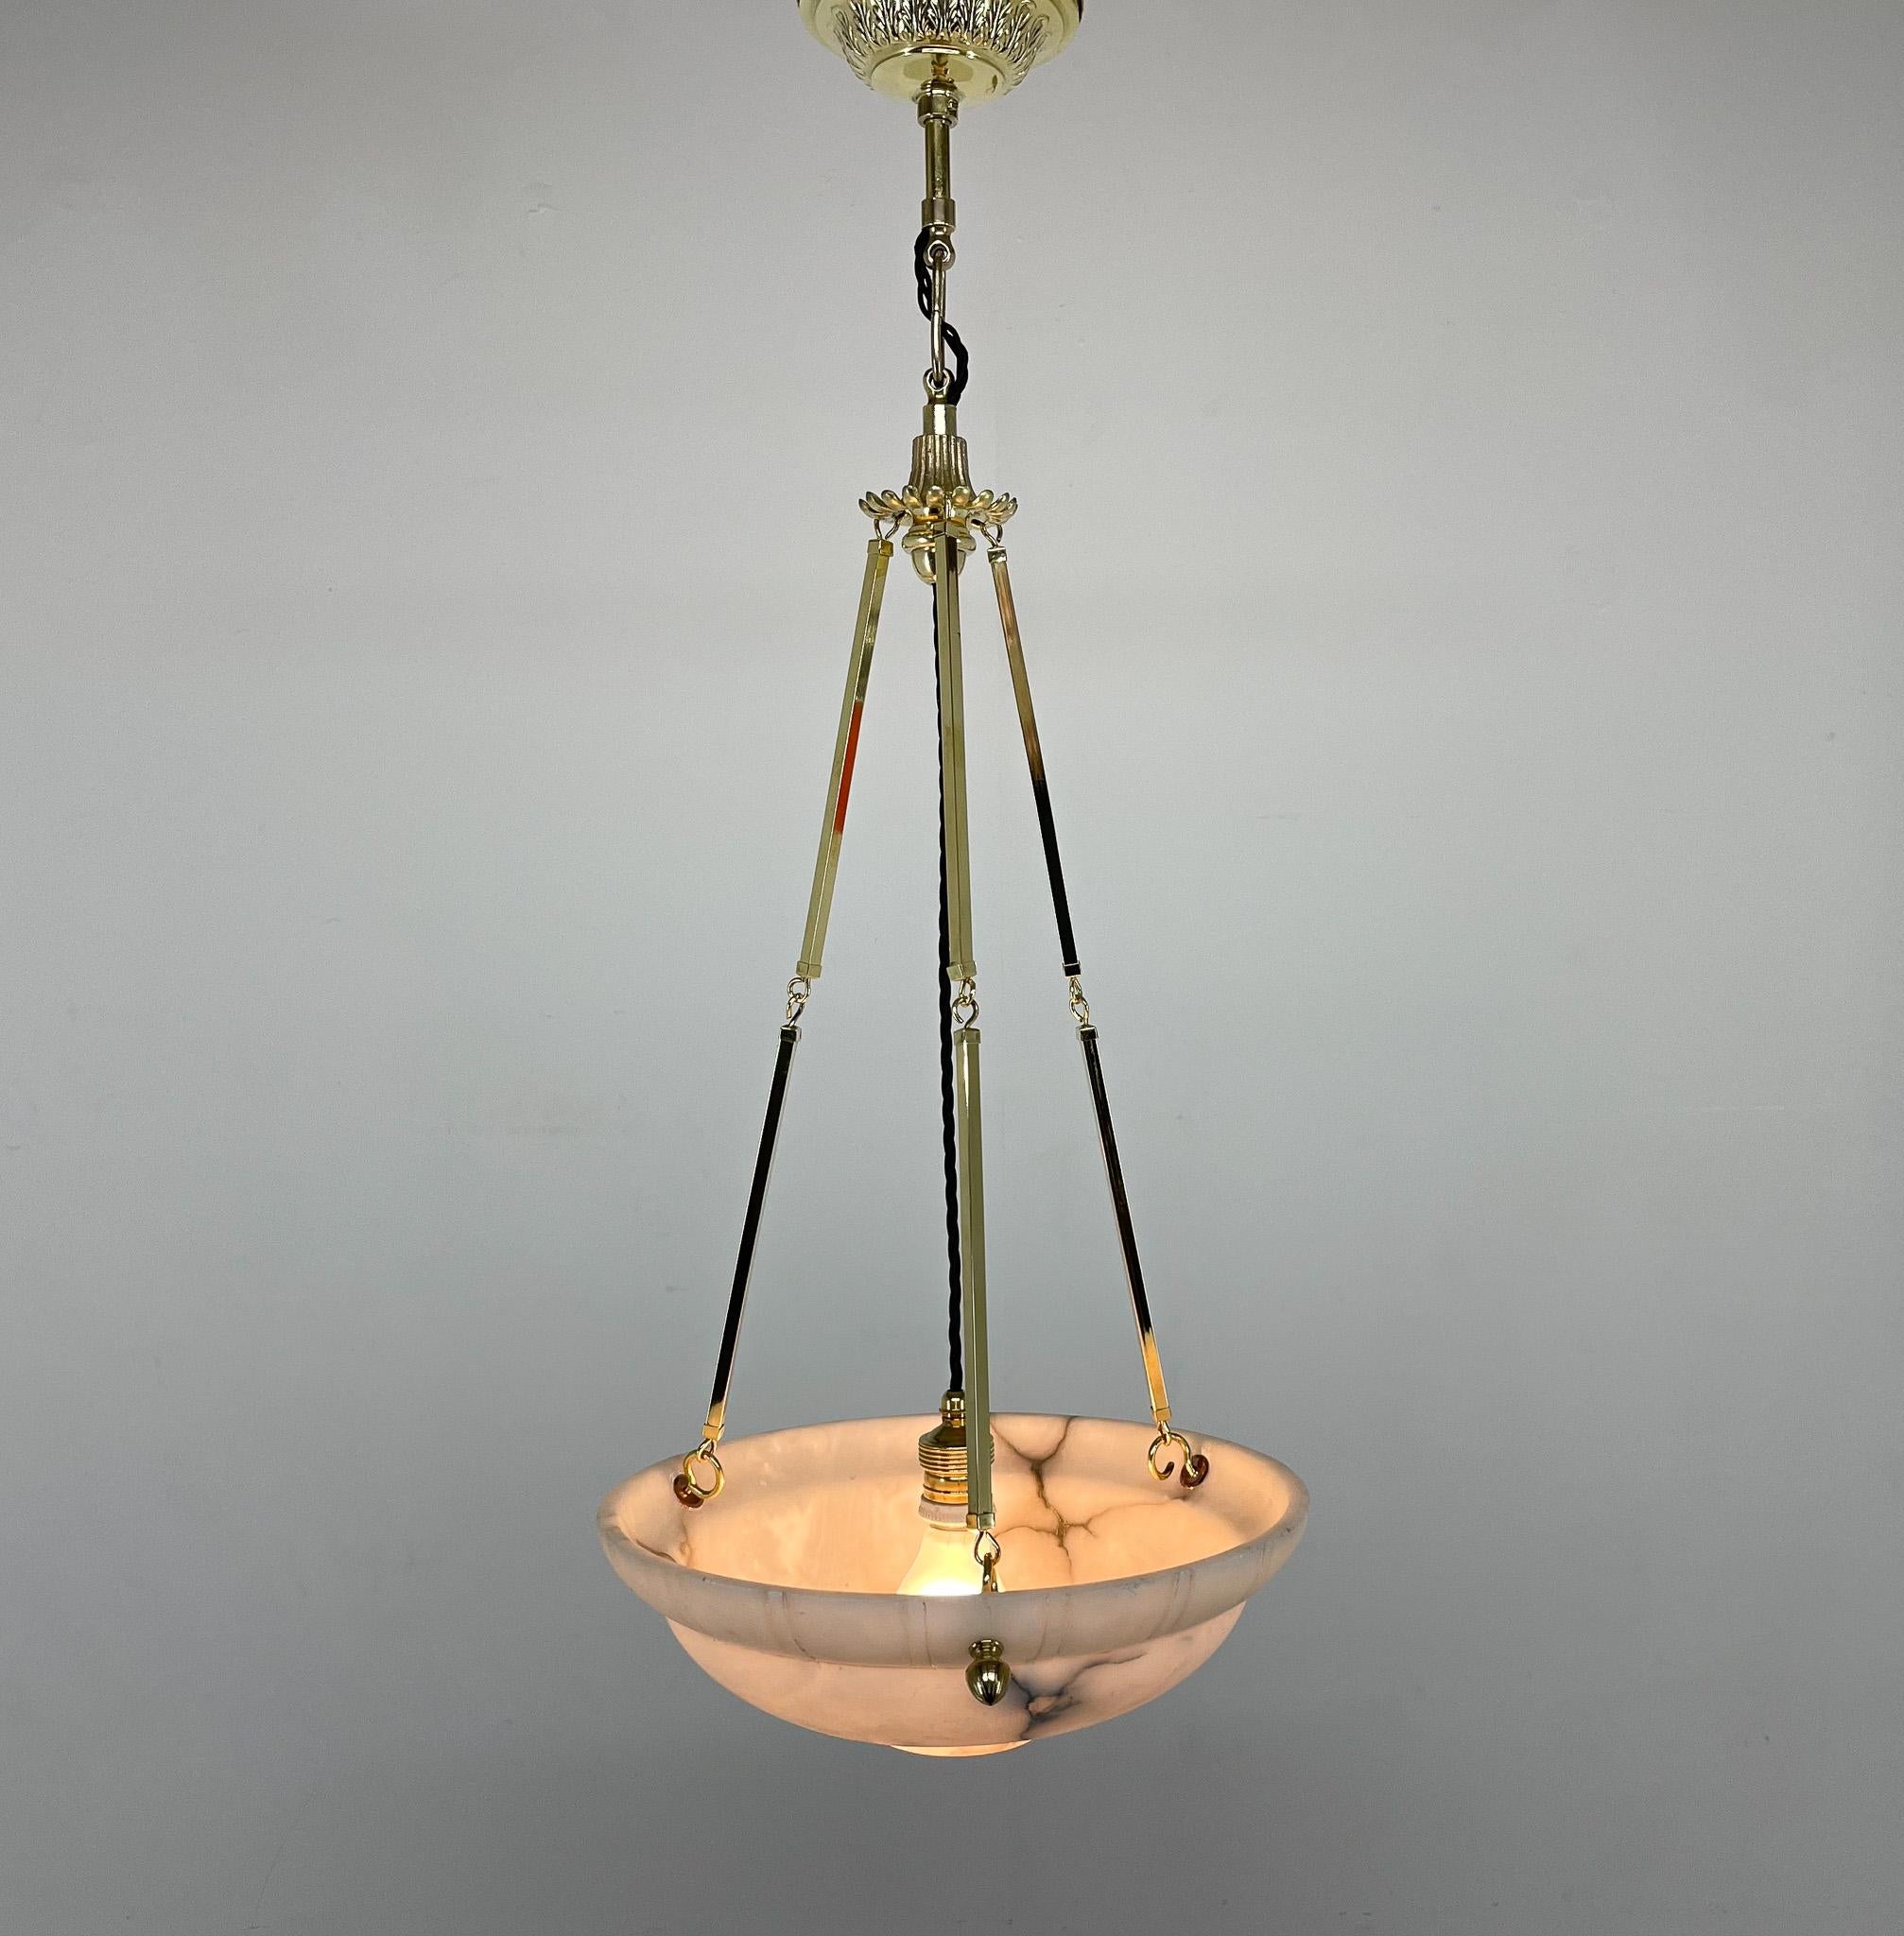 Exceptional alabaster pendant light on brass chains, made in 1930's. Fully restored. New wiring. Bulbs: 1x E25-27.